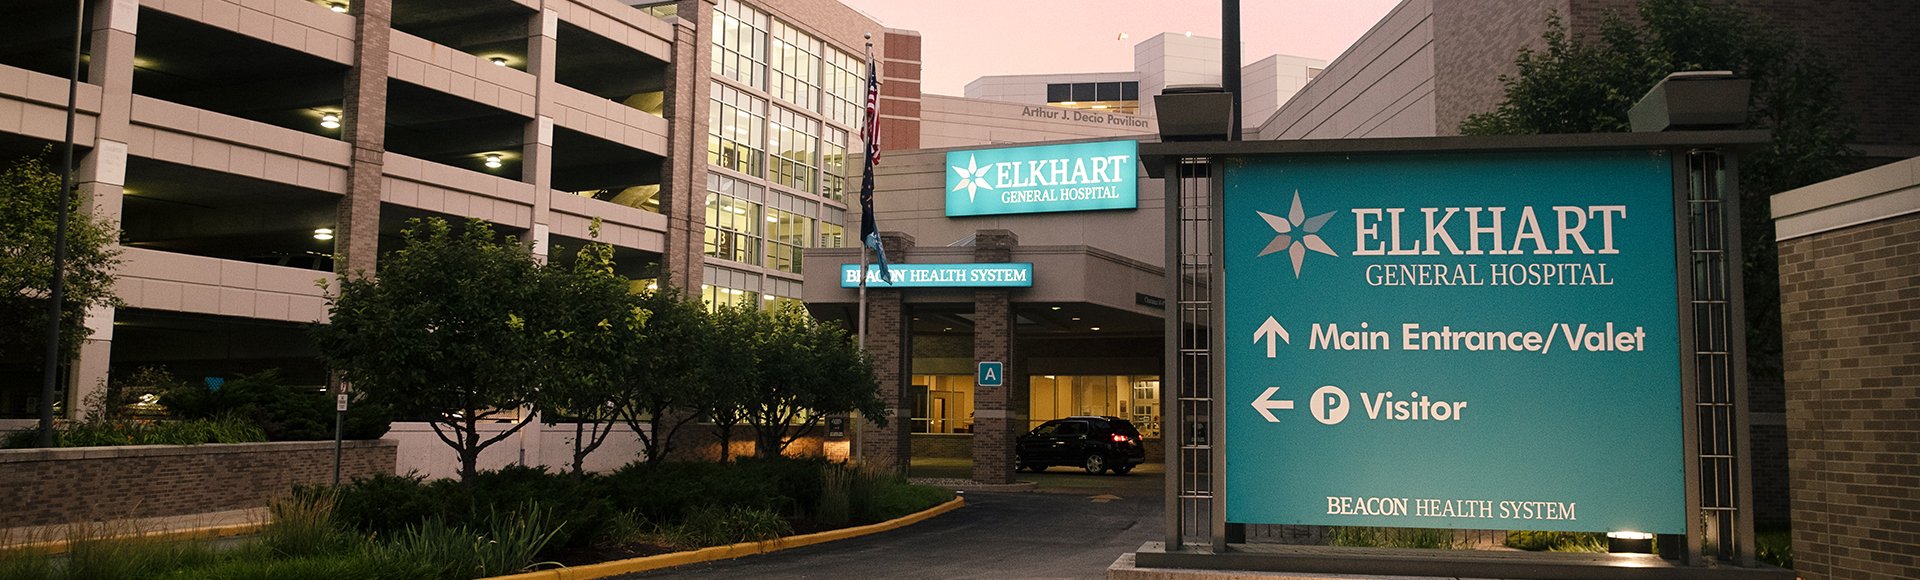 For over 100 years, the highly skilled professionals of Elkhart General Hospital have been providing comprehensive medical care to Elkhart and surrounding communities. We are a patient-first health care organization whose ongoing mission is to help create healthier communities throughout Michiana.